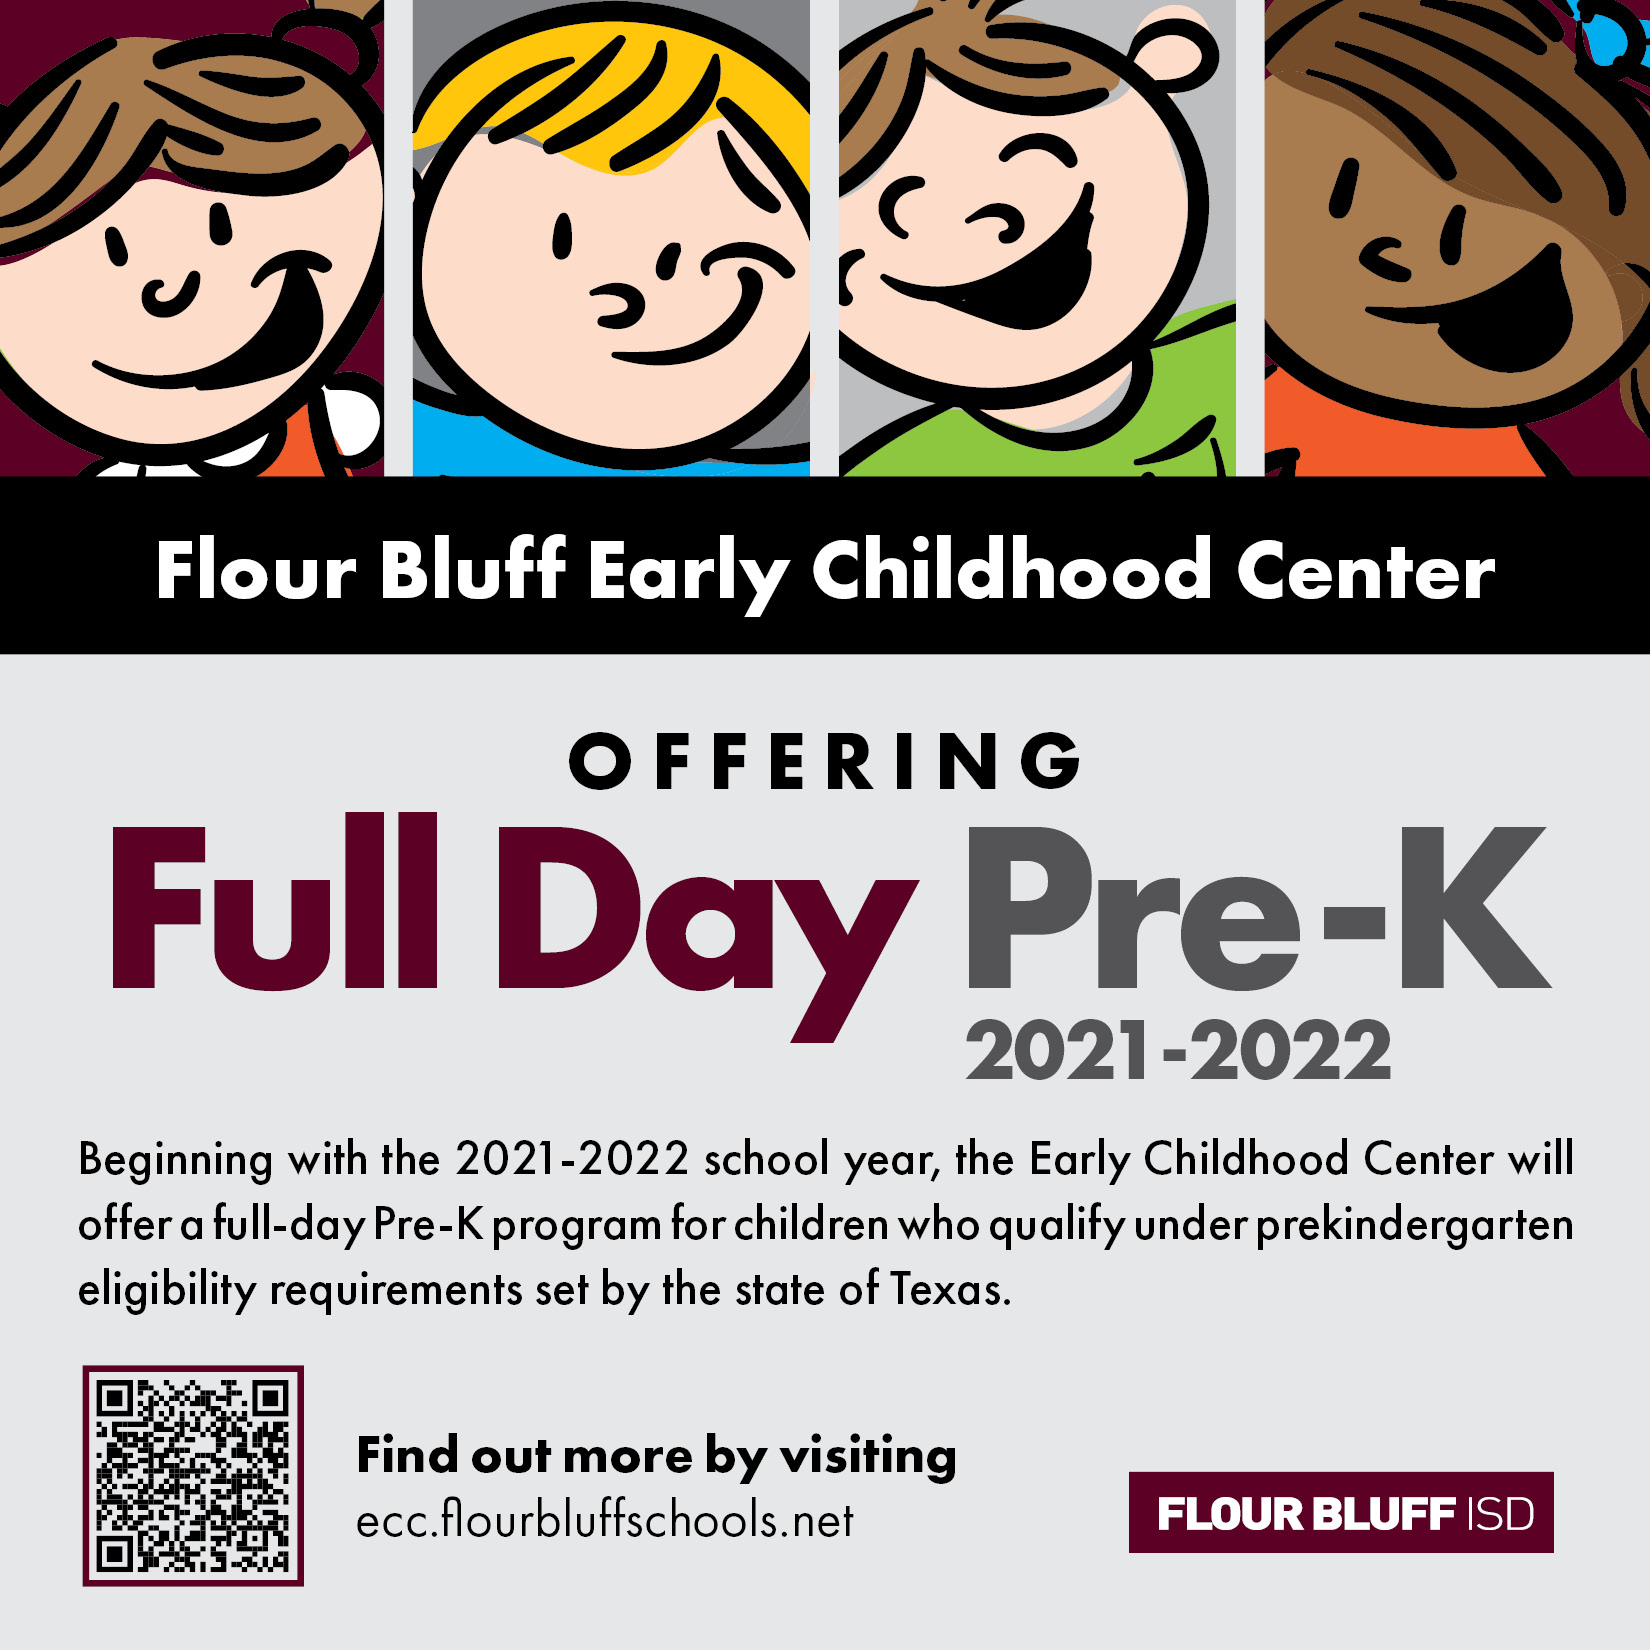 Flour Bluff ISD Early Childhood Campus to begin full-day Pre-K for 2021-2022 school year